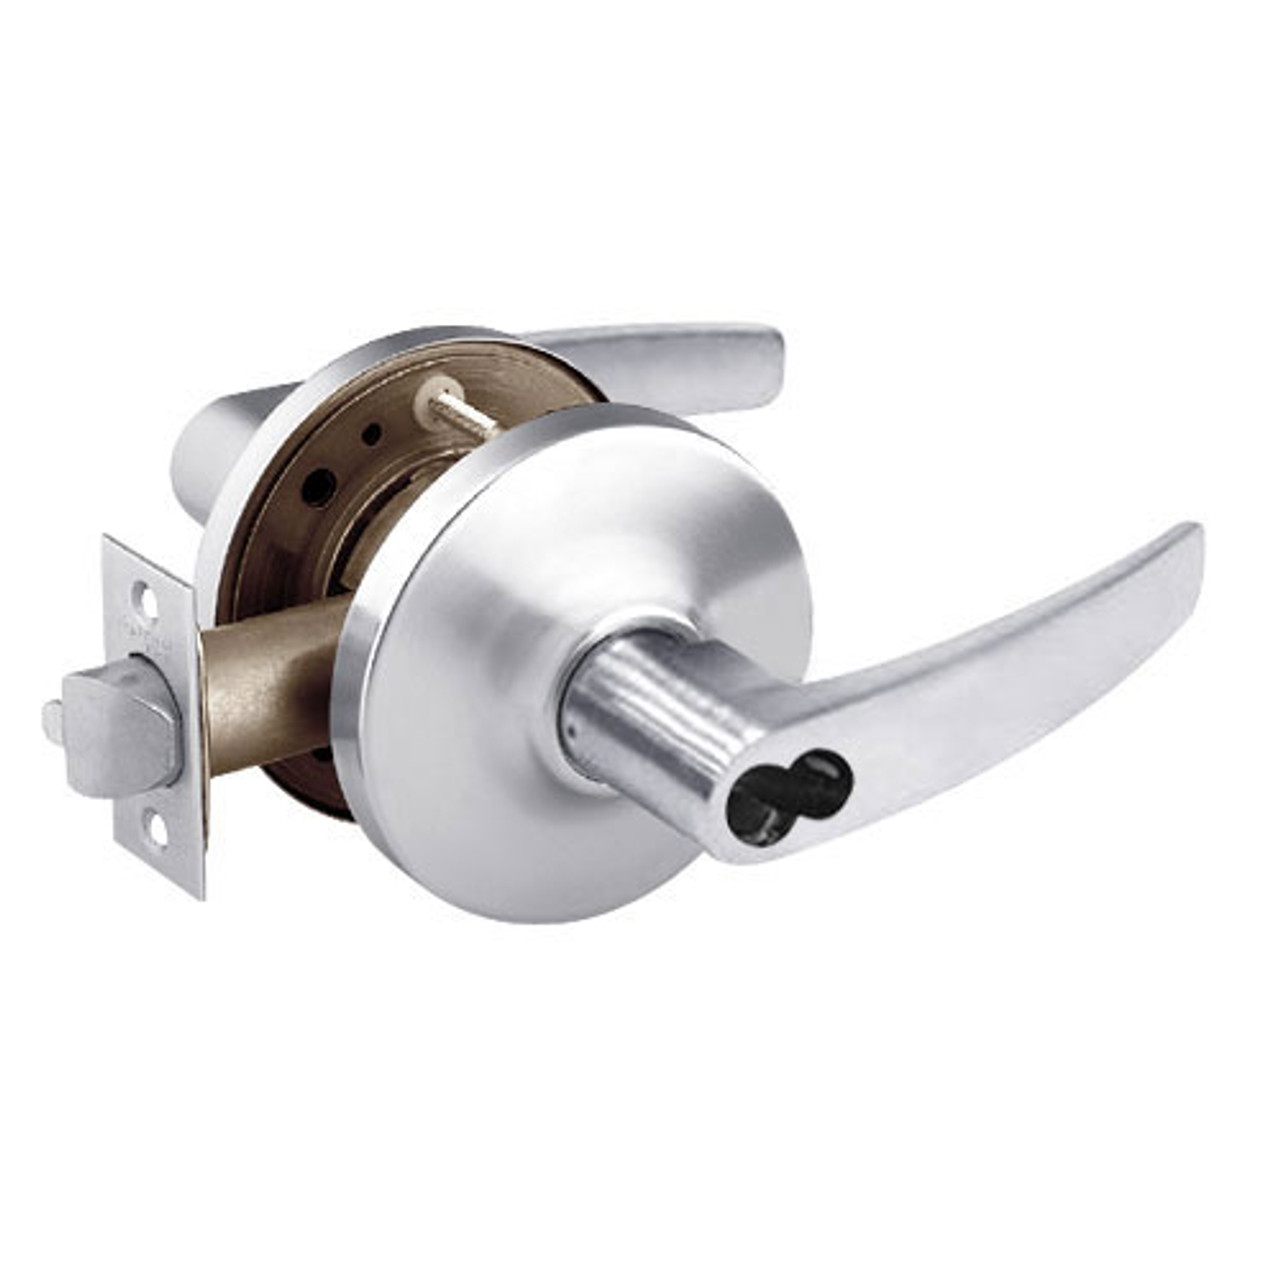 2860-10G37-GB-26 Sargent 10 Line Cylindrical Classroom Locks with B Lever Design and G Rose Prepped for LFIC in Bright Chrome